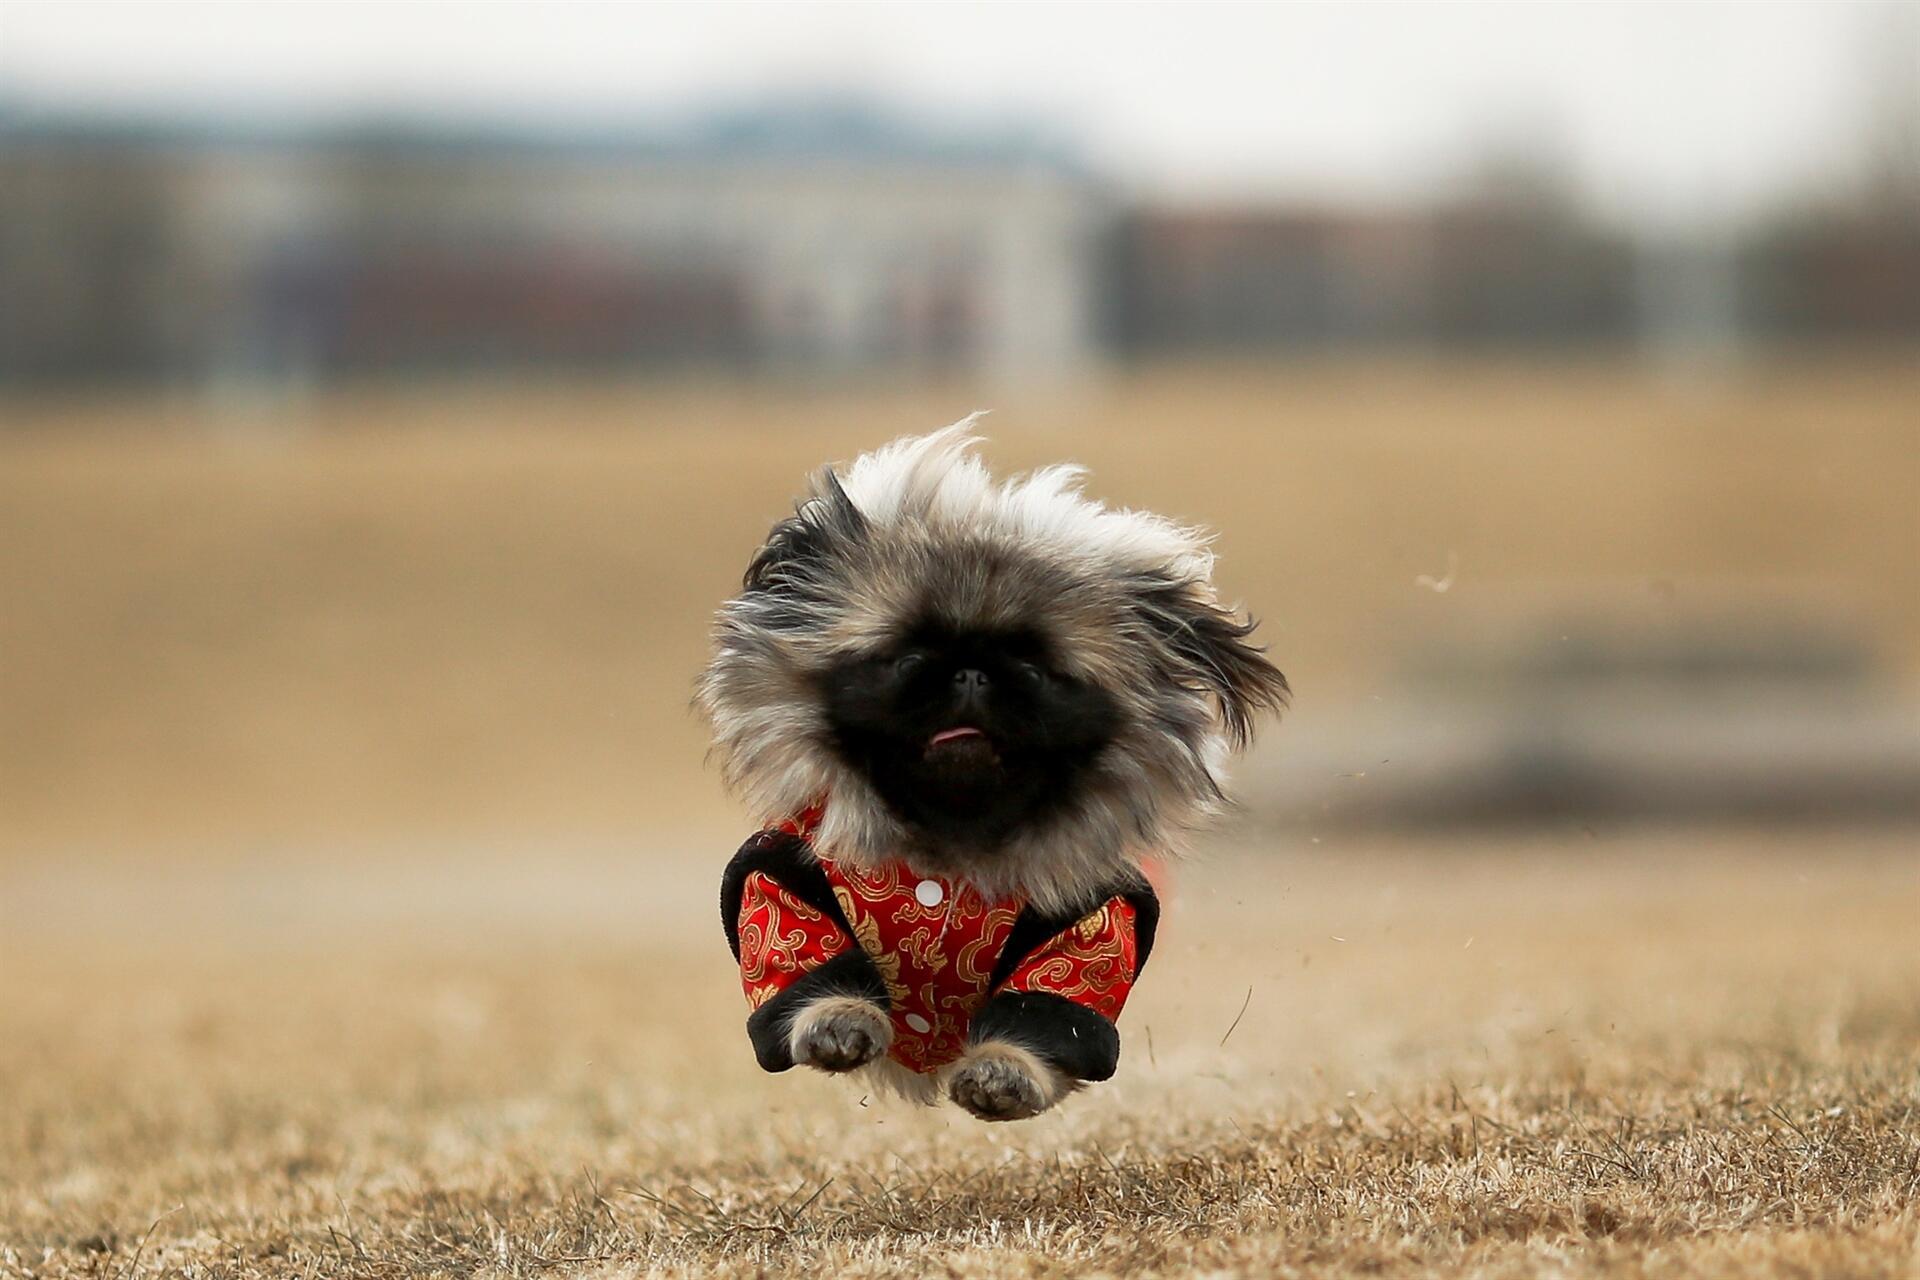 As China's Year of the Dog begins, Pekingese breed is scarce